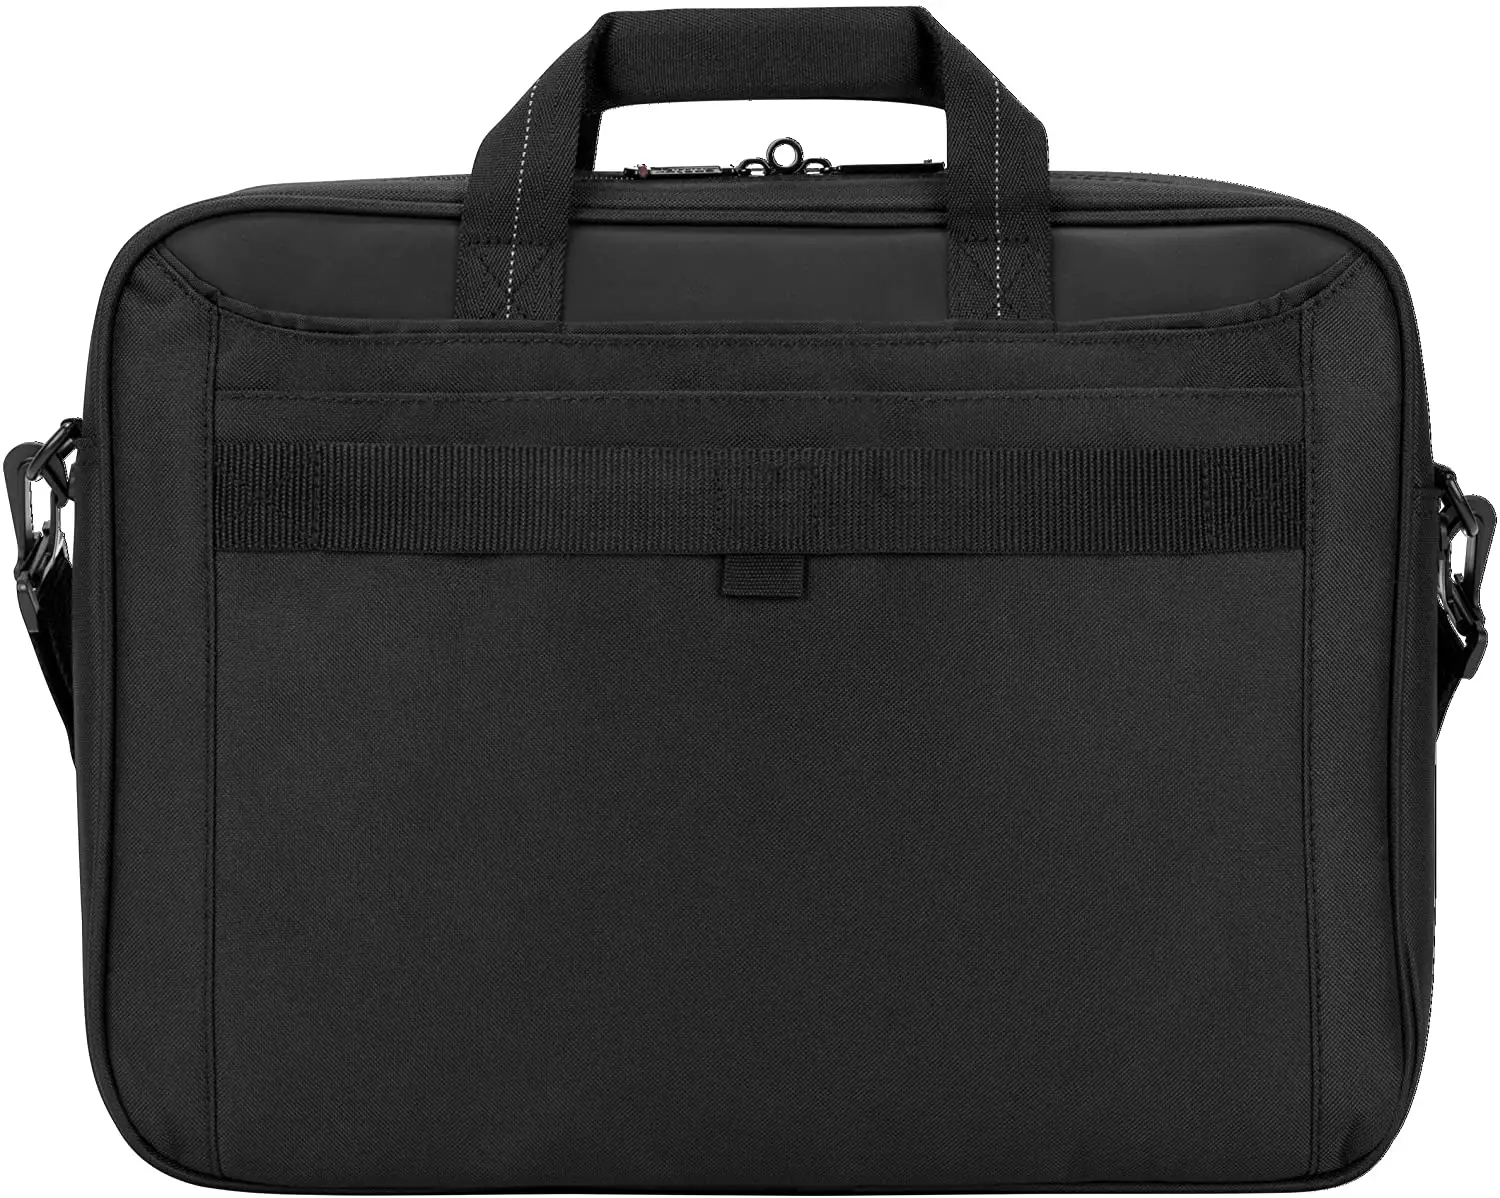 Classic Slim Briefcase with Crossbody Shoulder Bag Design for the Business Professional Travel Laptop bag Protection